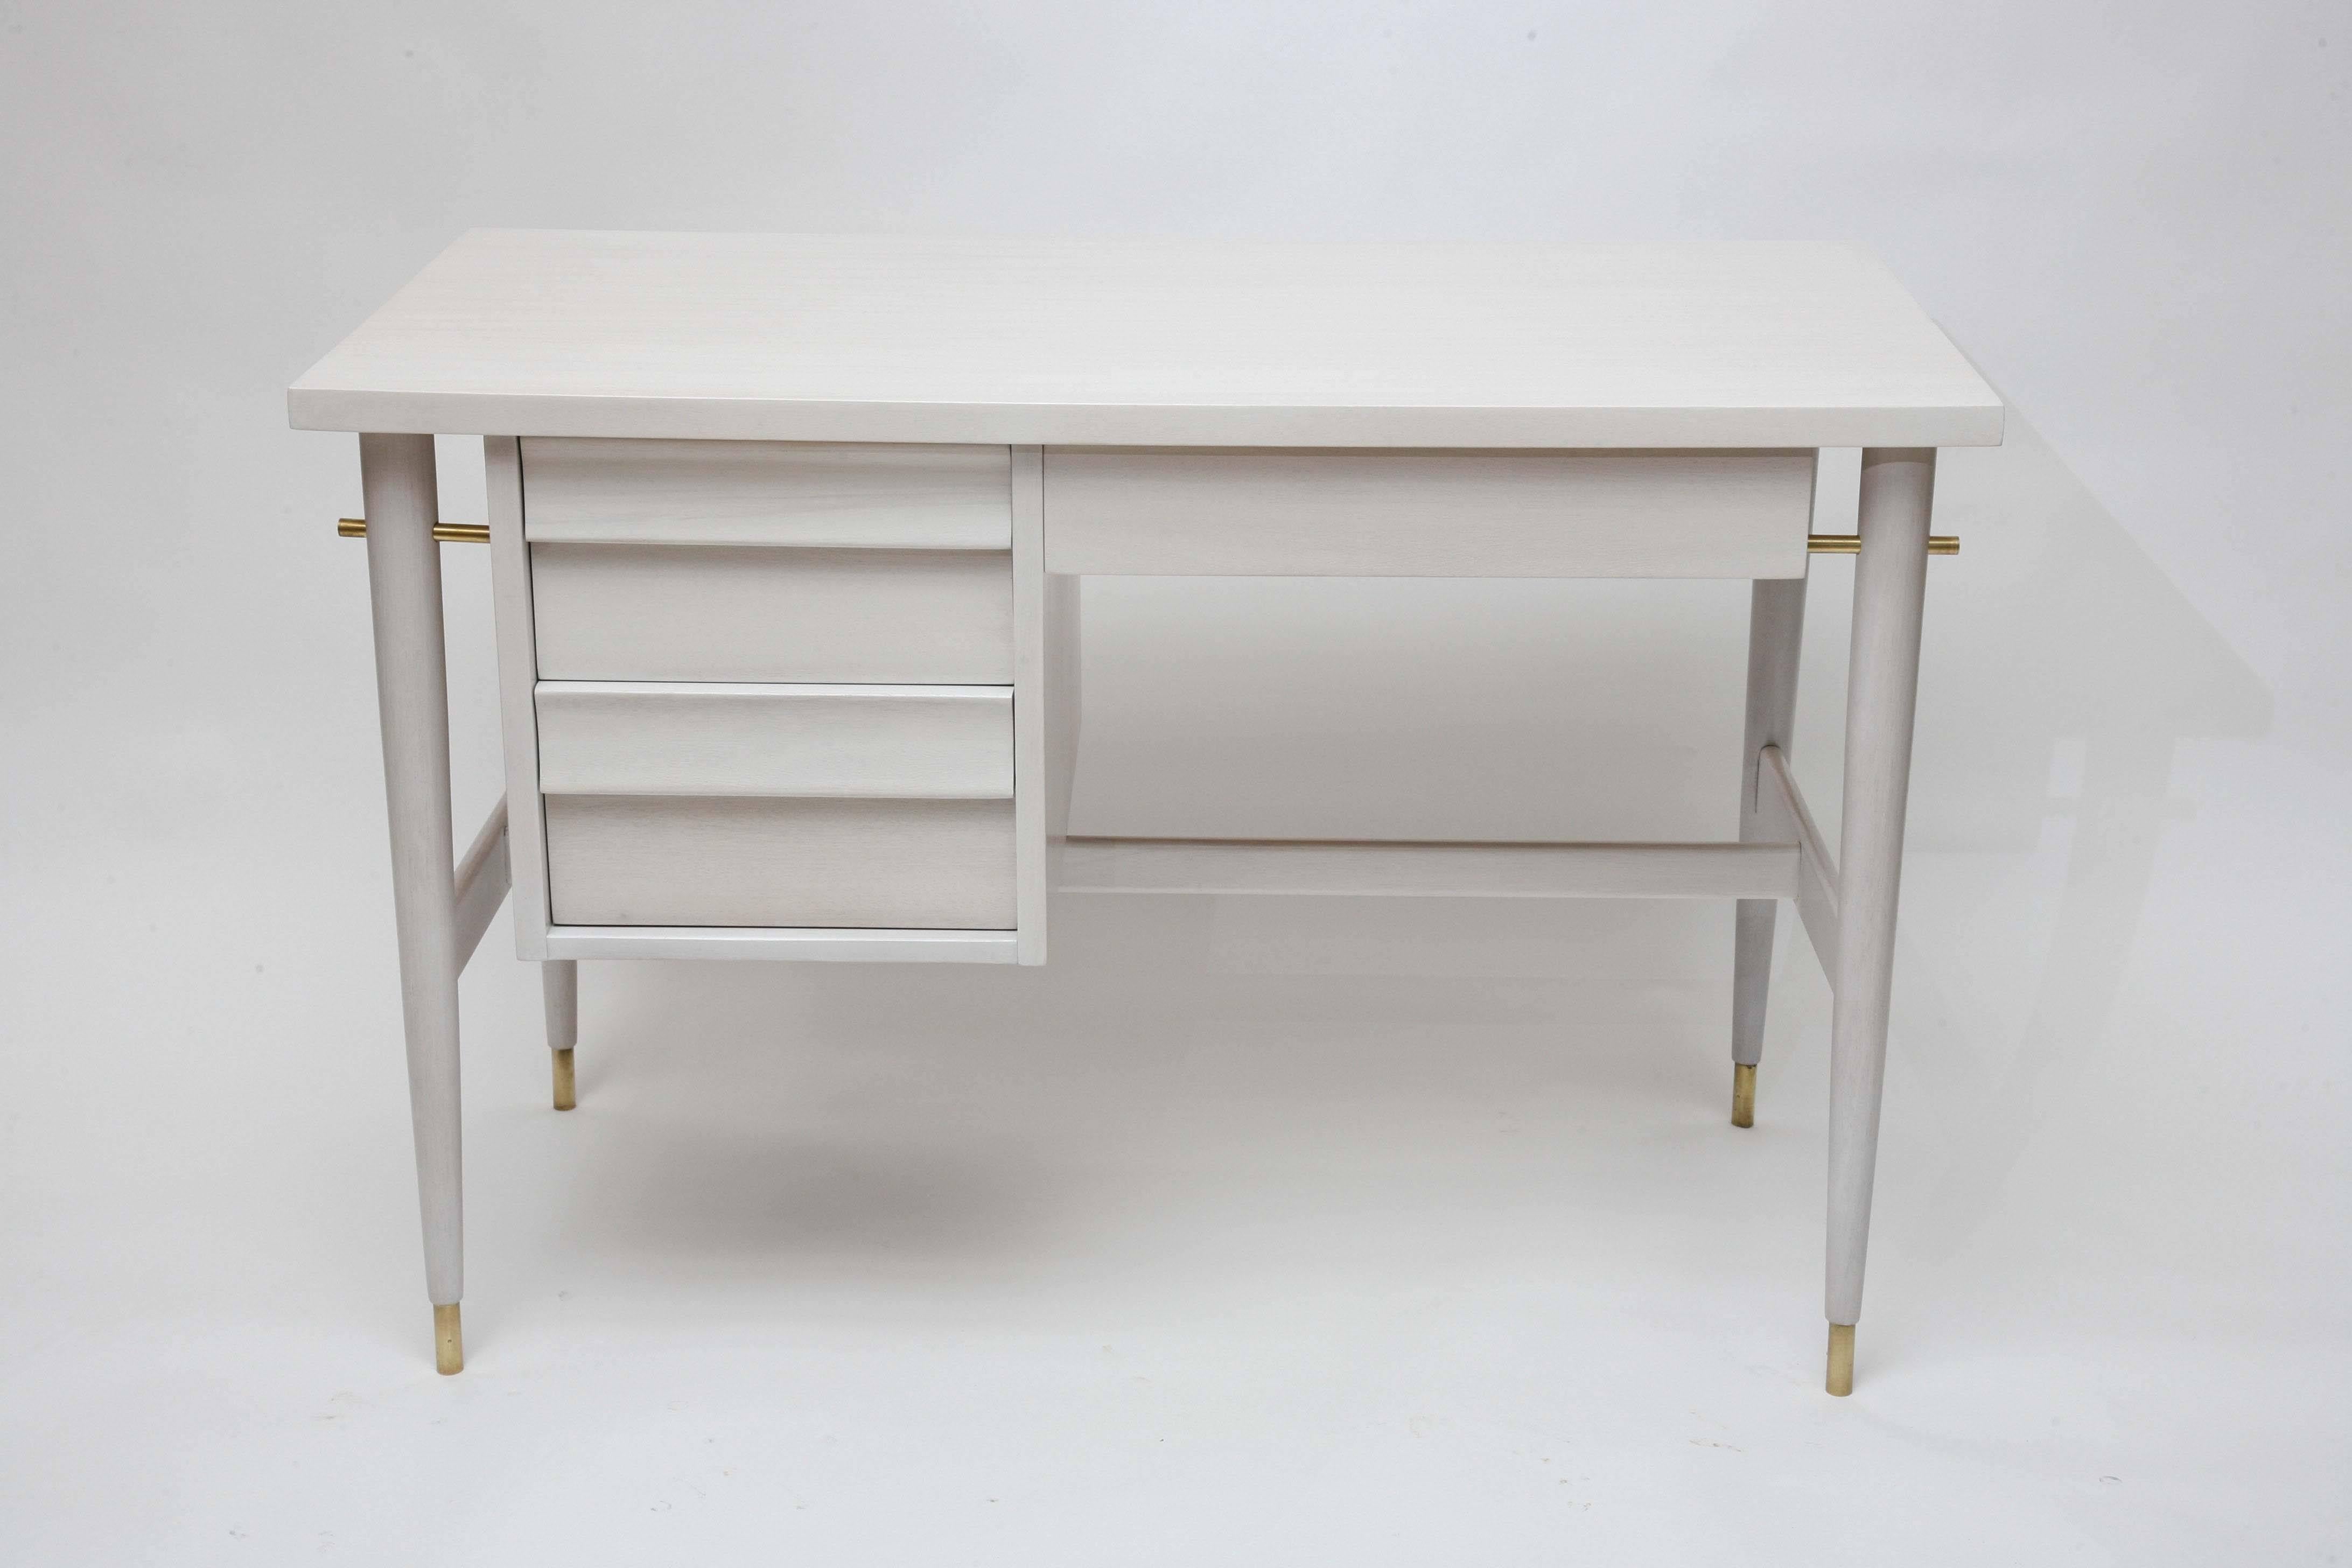 We've taken this superlative, clean-lined 1950s American desk in beautiful ribbon mahogany and bleached it an additional three times to obtain its wonderfully subtle coloring… a blend of palest cream and gray. Made richer still by the solid brass